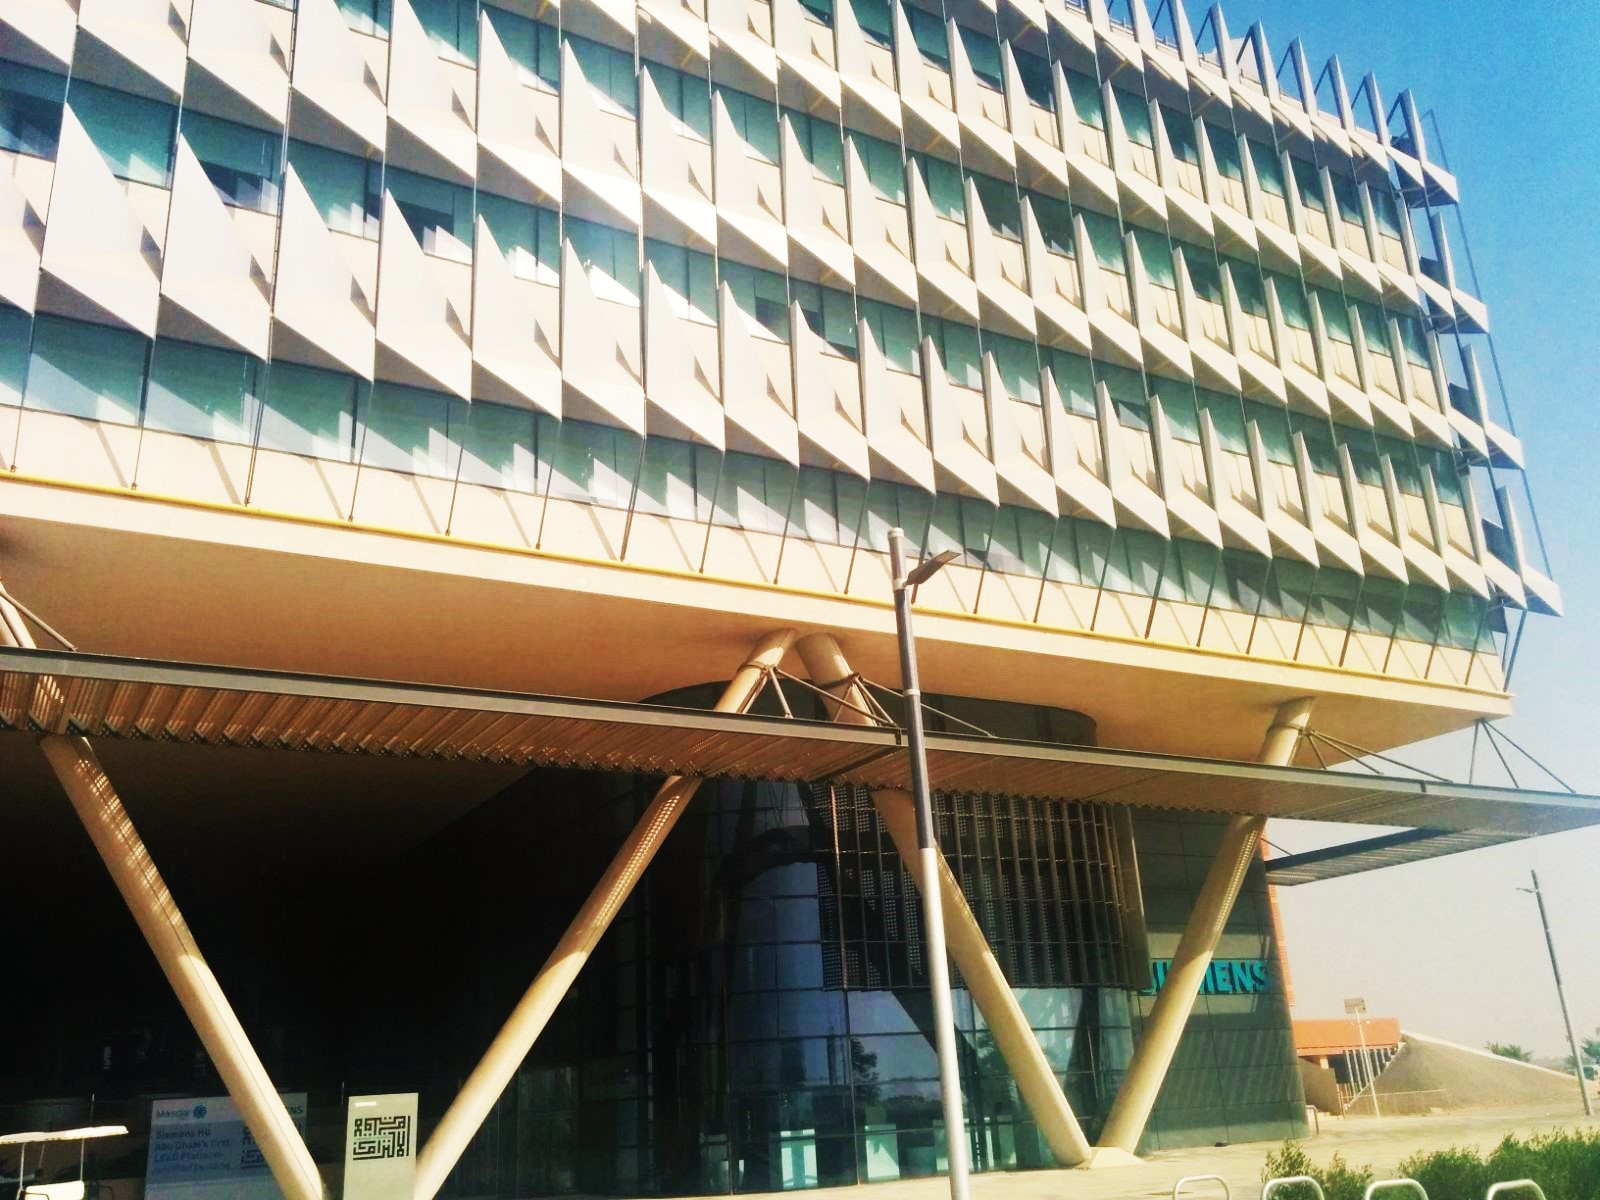 Abu Dhabi Invest's new Offices in the Masdar City, Abu Dhabi 